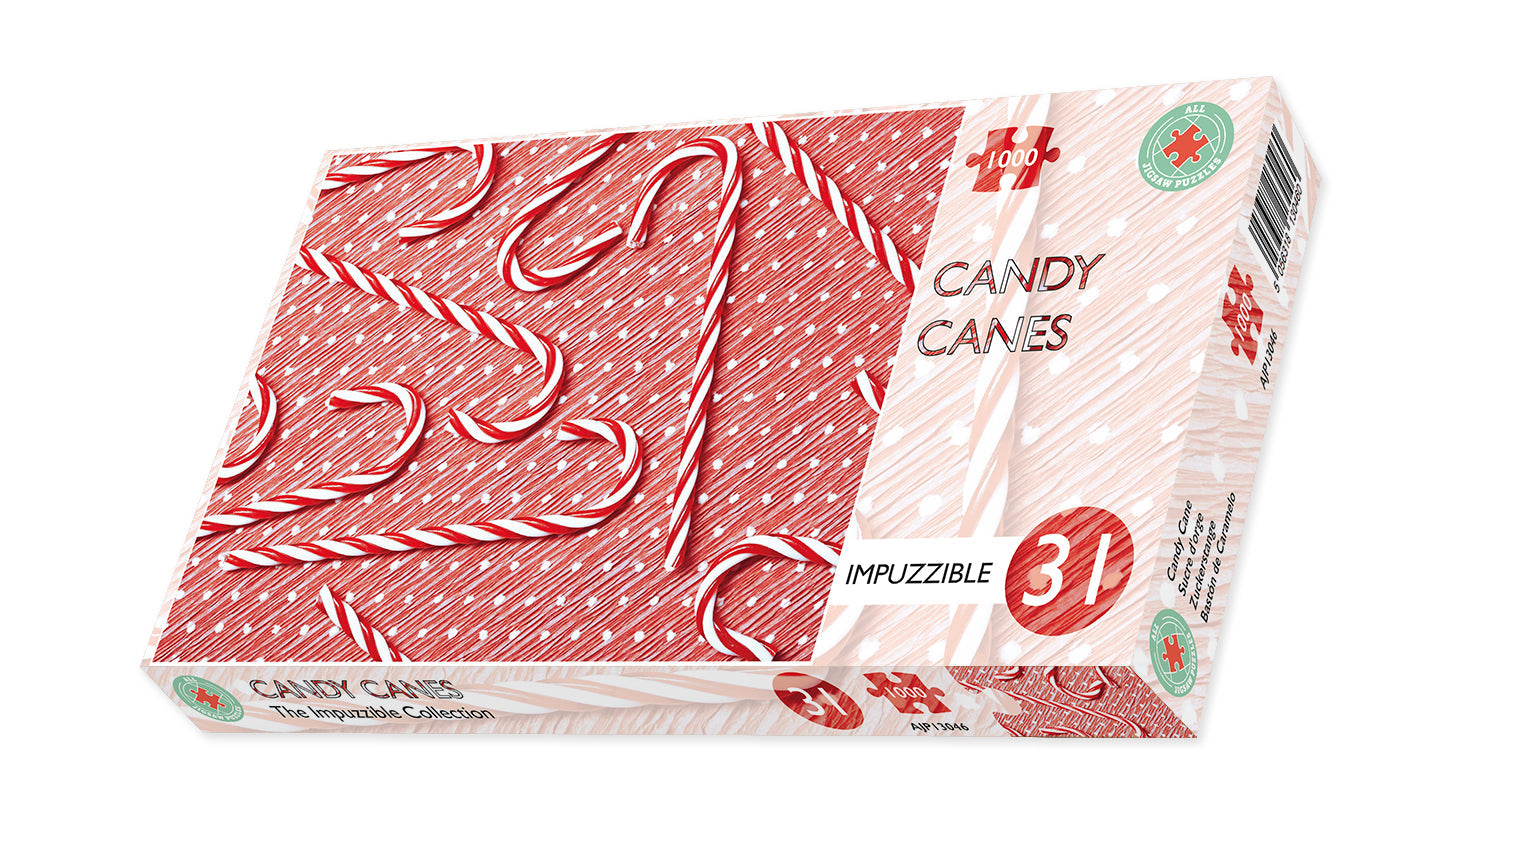 Candy Cane - Impuzzible No. 31 - 1000 Piece Jigsaw Puzzle box